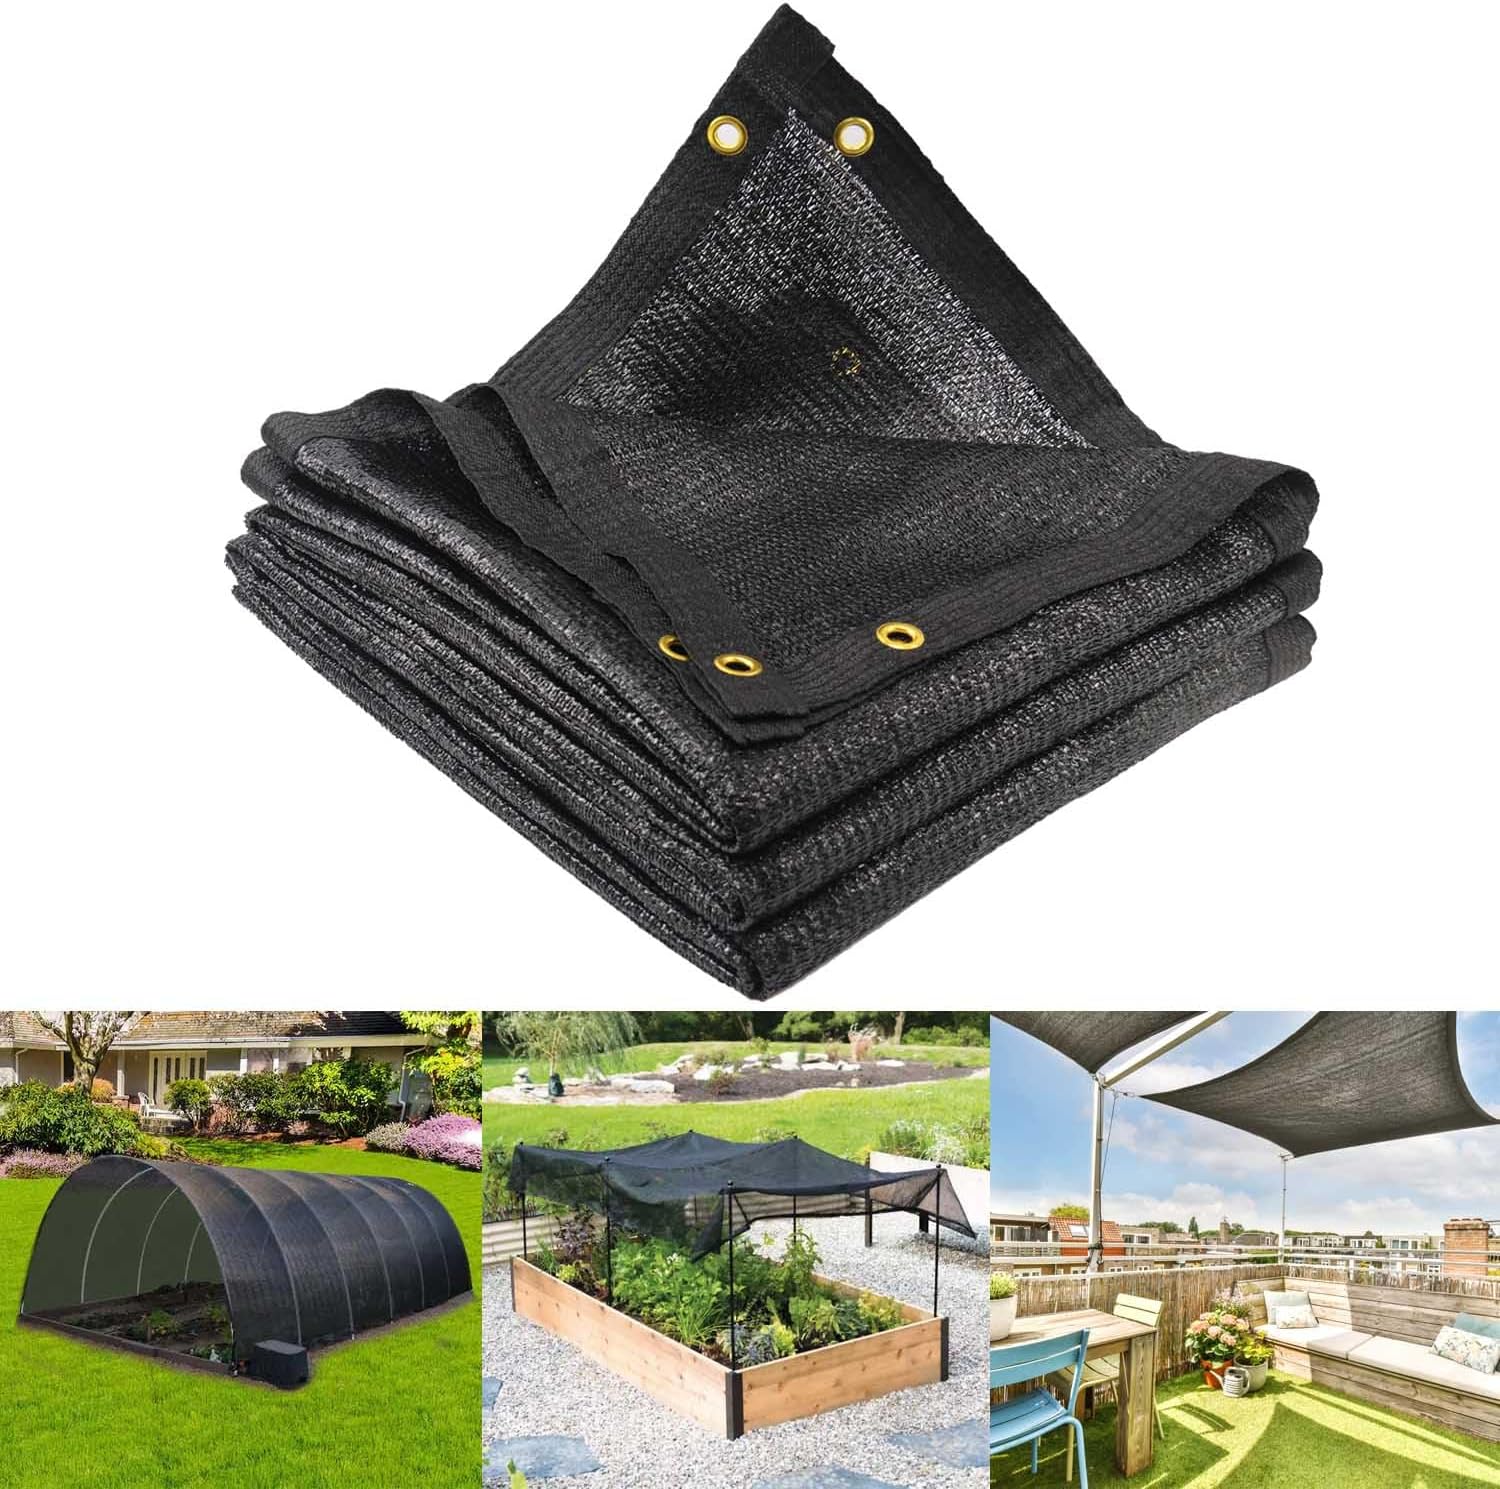 Mklsit Garden 70% Shade Cloth, 10 x 20 FT Black Sun Shade Net, Mesh Sun Shade Tarp with Reinforced Brass Grommets, Sunblock Shade Cloths for Plants Cover, Greenhouse, Patio, Chicken Coop, Tomatoes